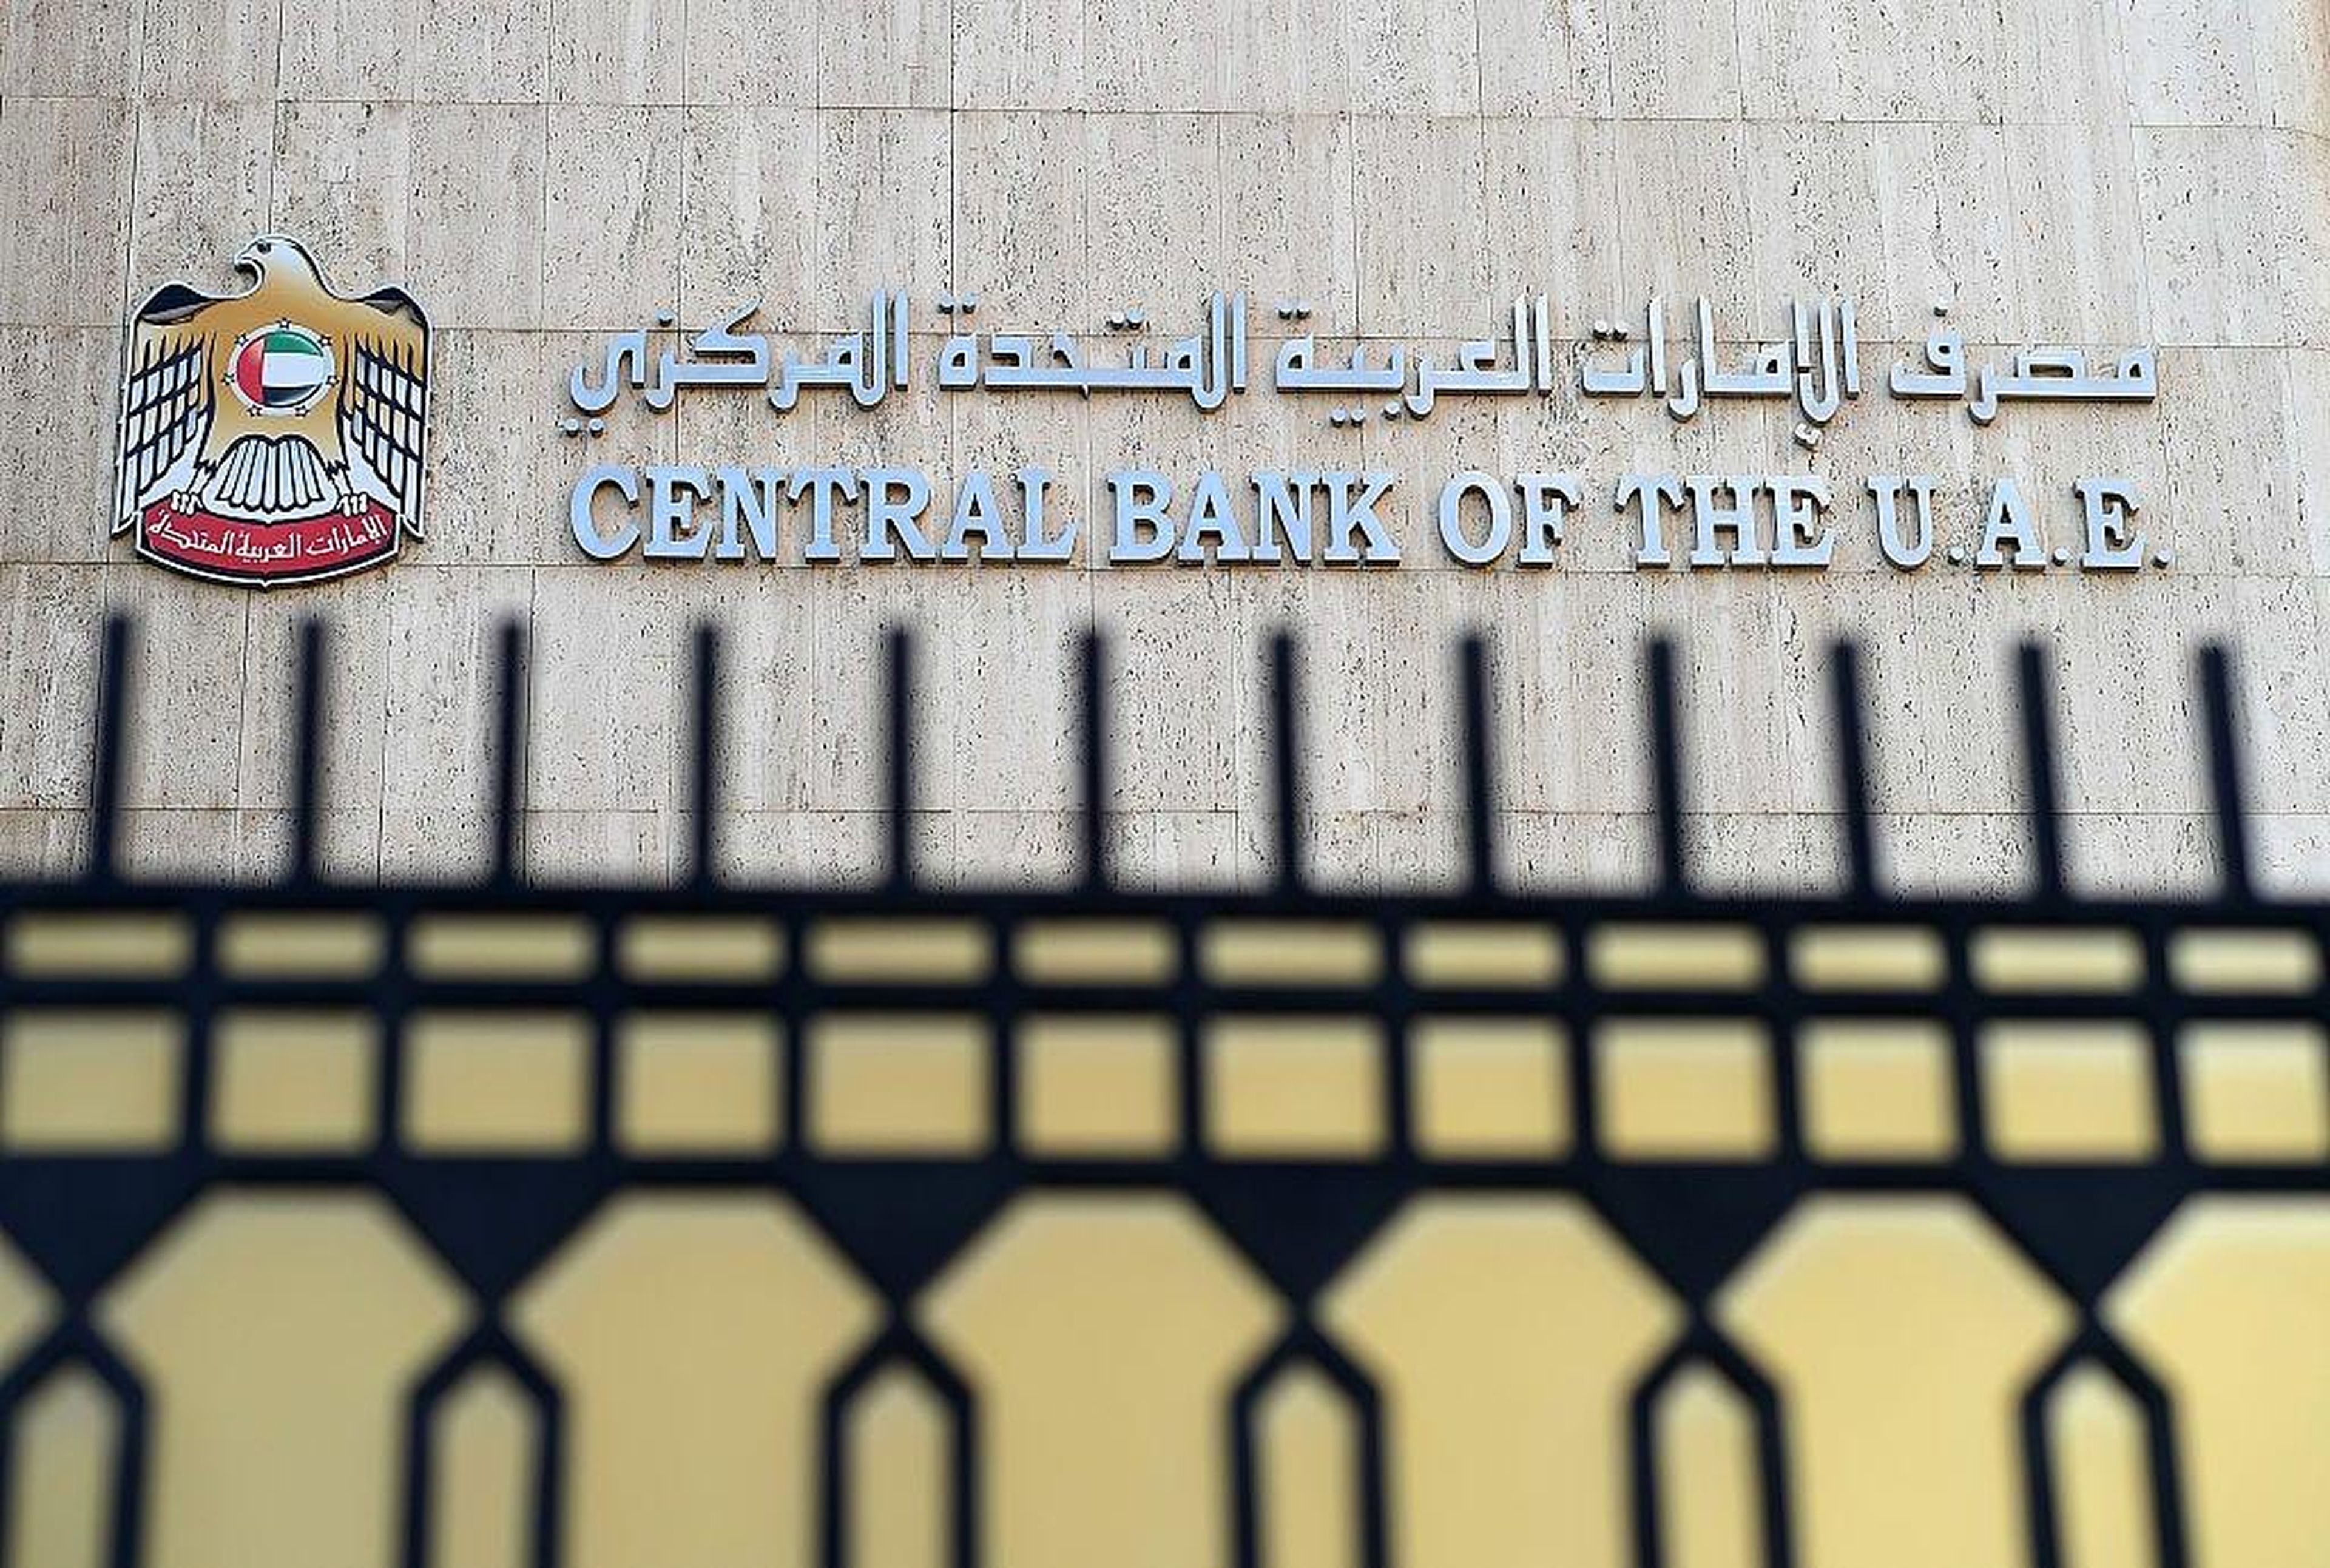 Central Bank of The U.A.E. in Dubai, United Arab Emirates. Tom Dulat/Getty Images